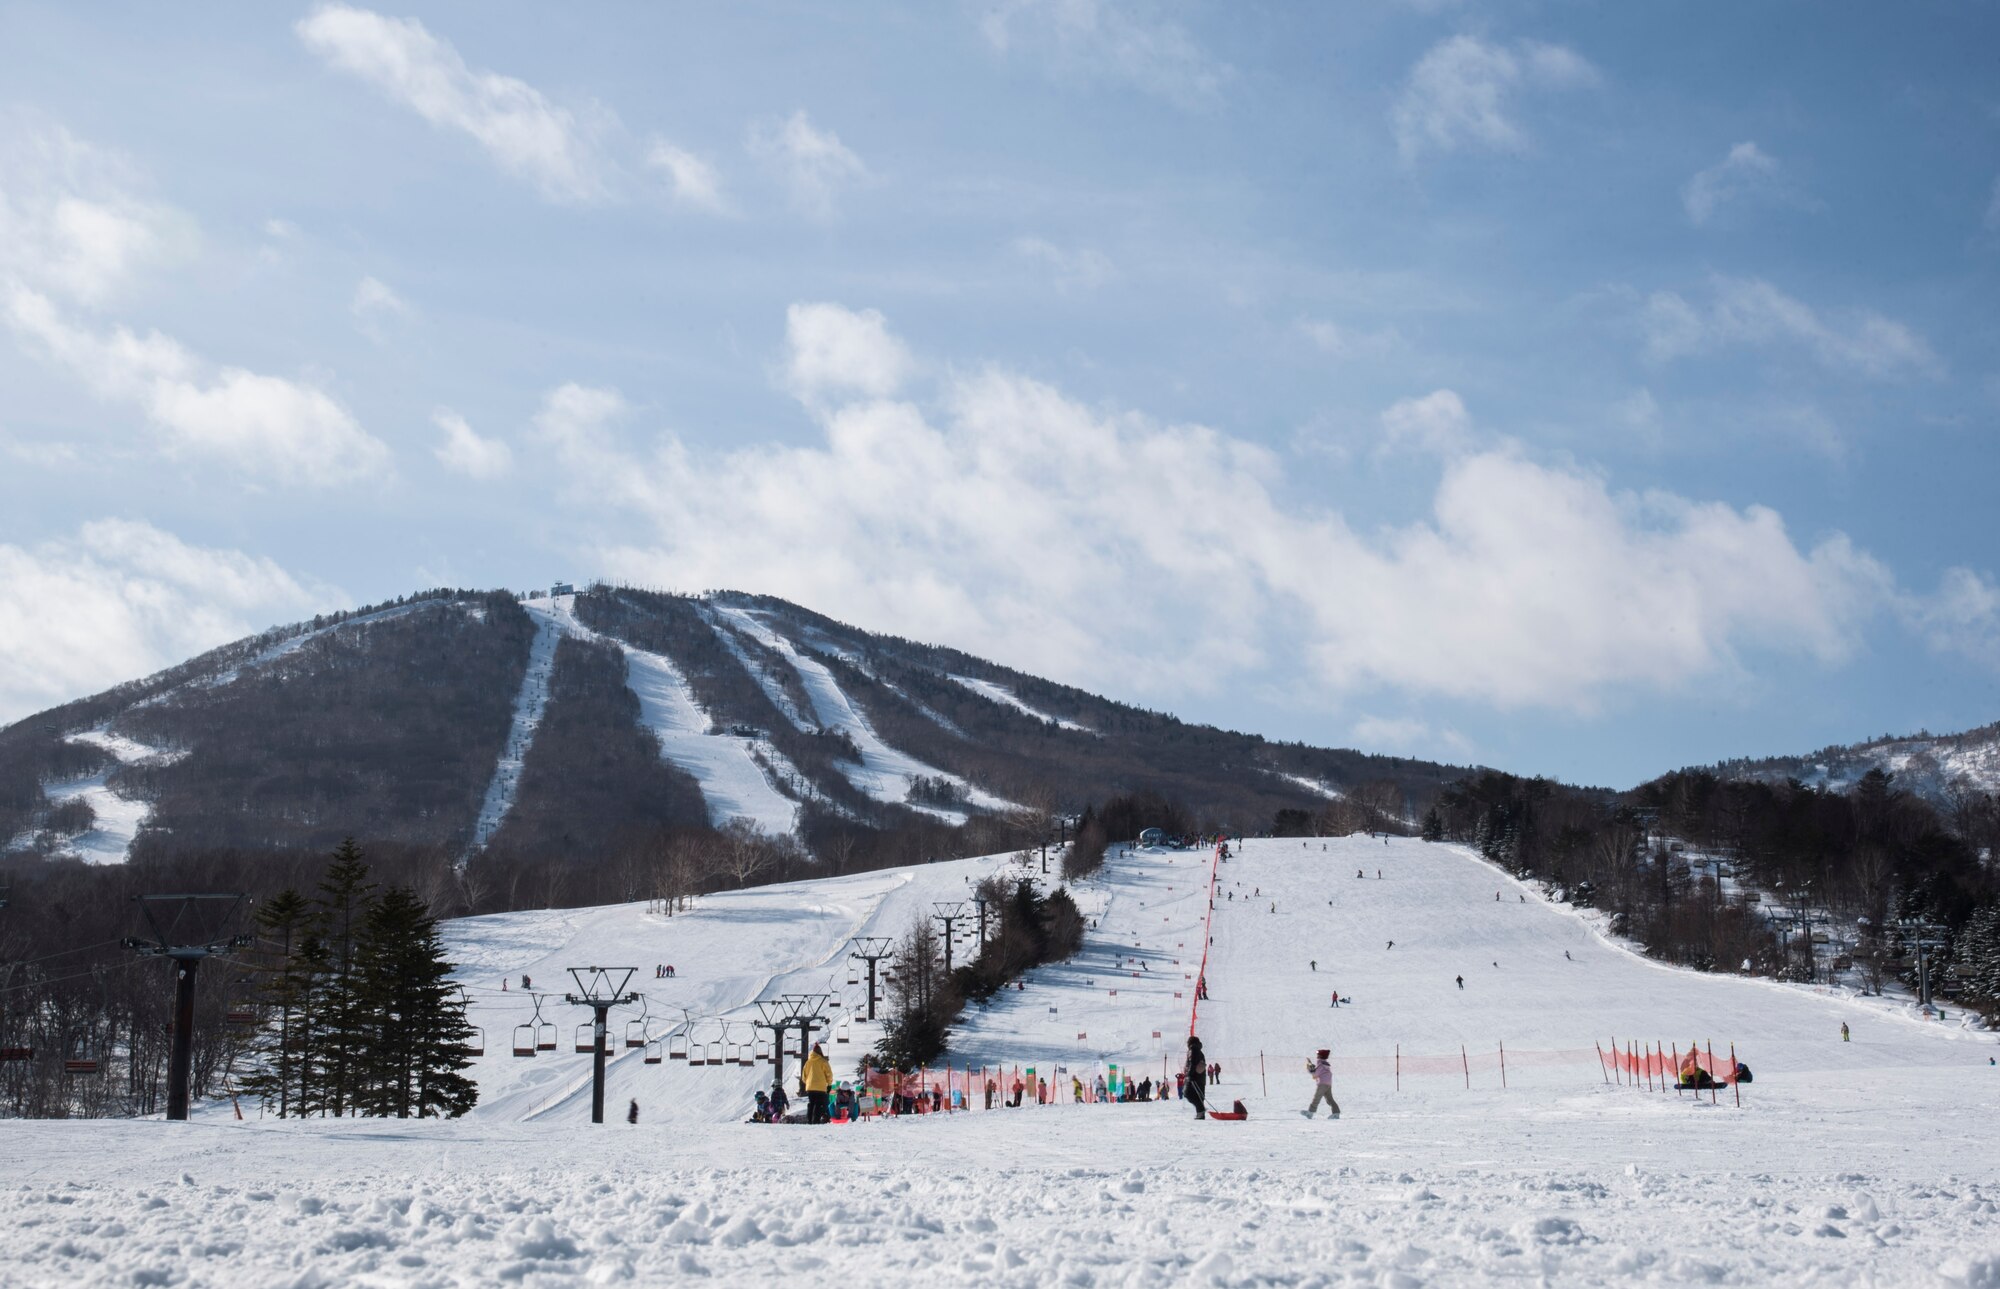 Skiers prepare to ride a lift at a ski resort in Hachimantai, Japan, Jan. 29, 2017. Misawa Air Base's chaplain corps provided an opportunity for Airmen to exercise their resiliency tools during a ski trip. (U.S. Air Force photo by Airman 1st Class Sadie Colbert)